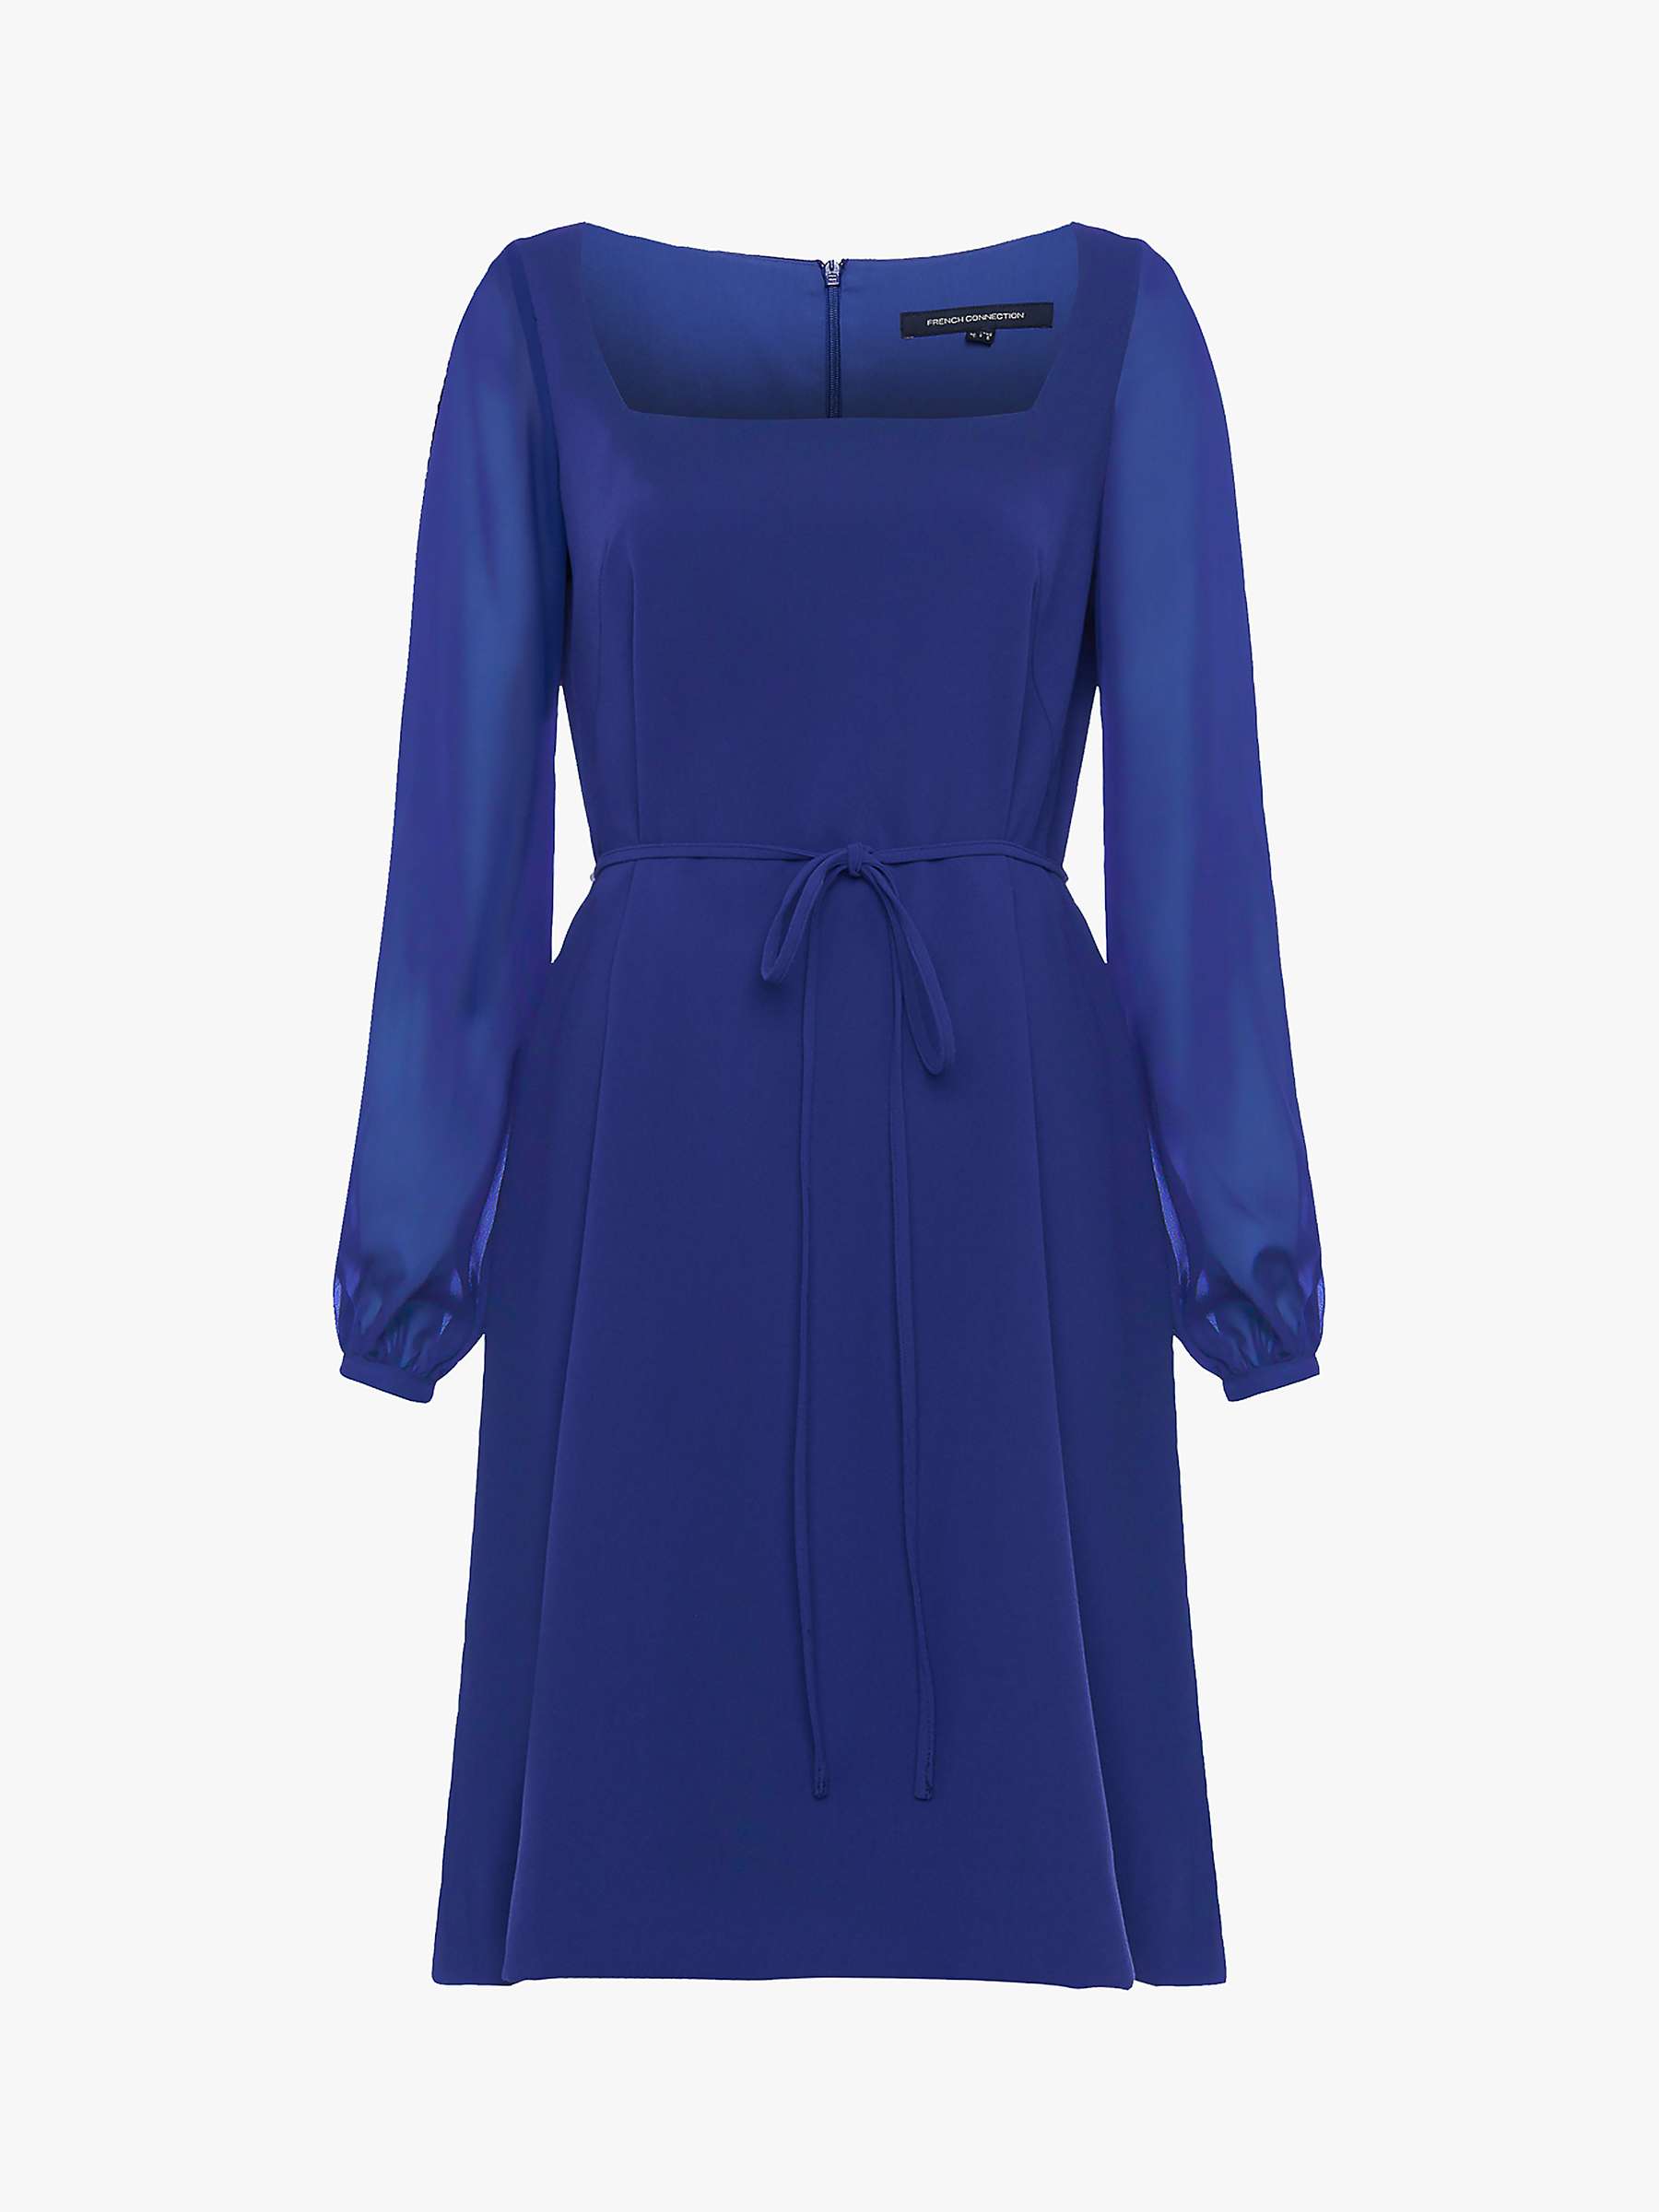 Buy French Connection Addinalla Crepe Square Neck Mini Dress Online at johnlewis.com